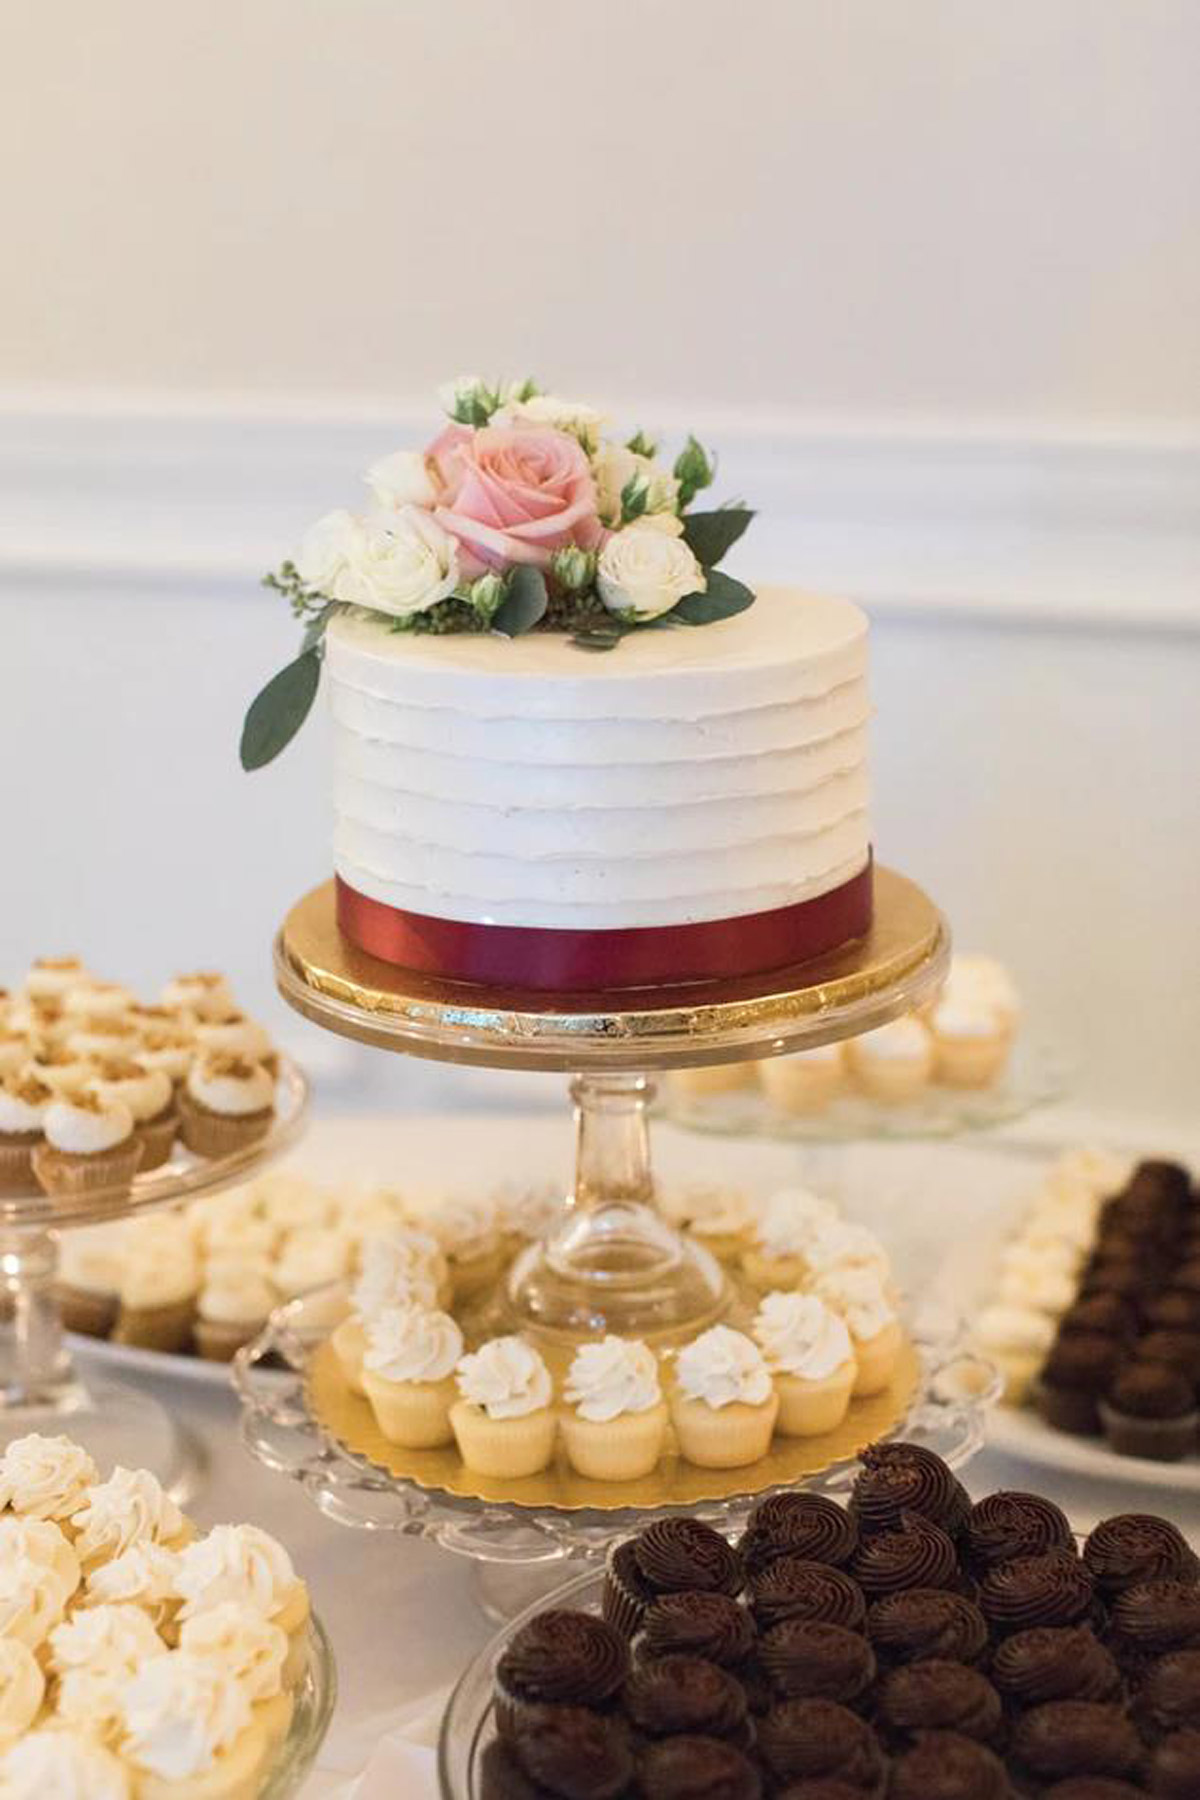 Wedding Planning 101: Know When to Splurge and When to Save